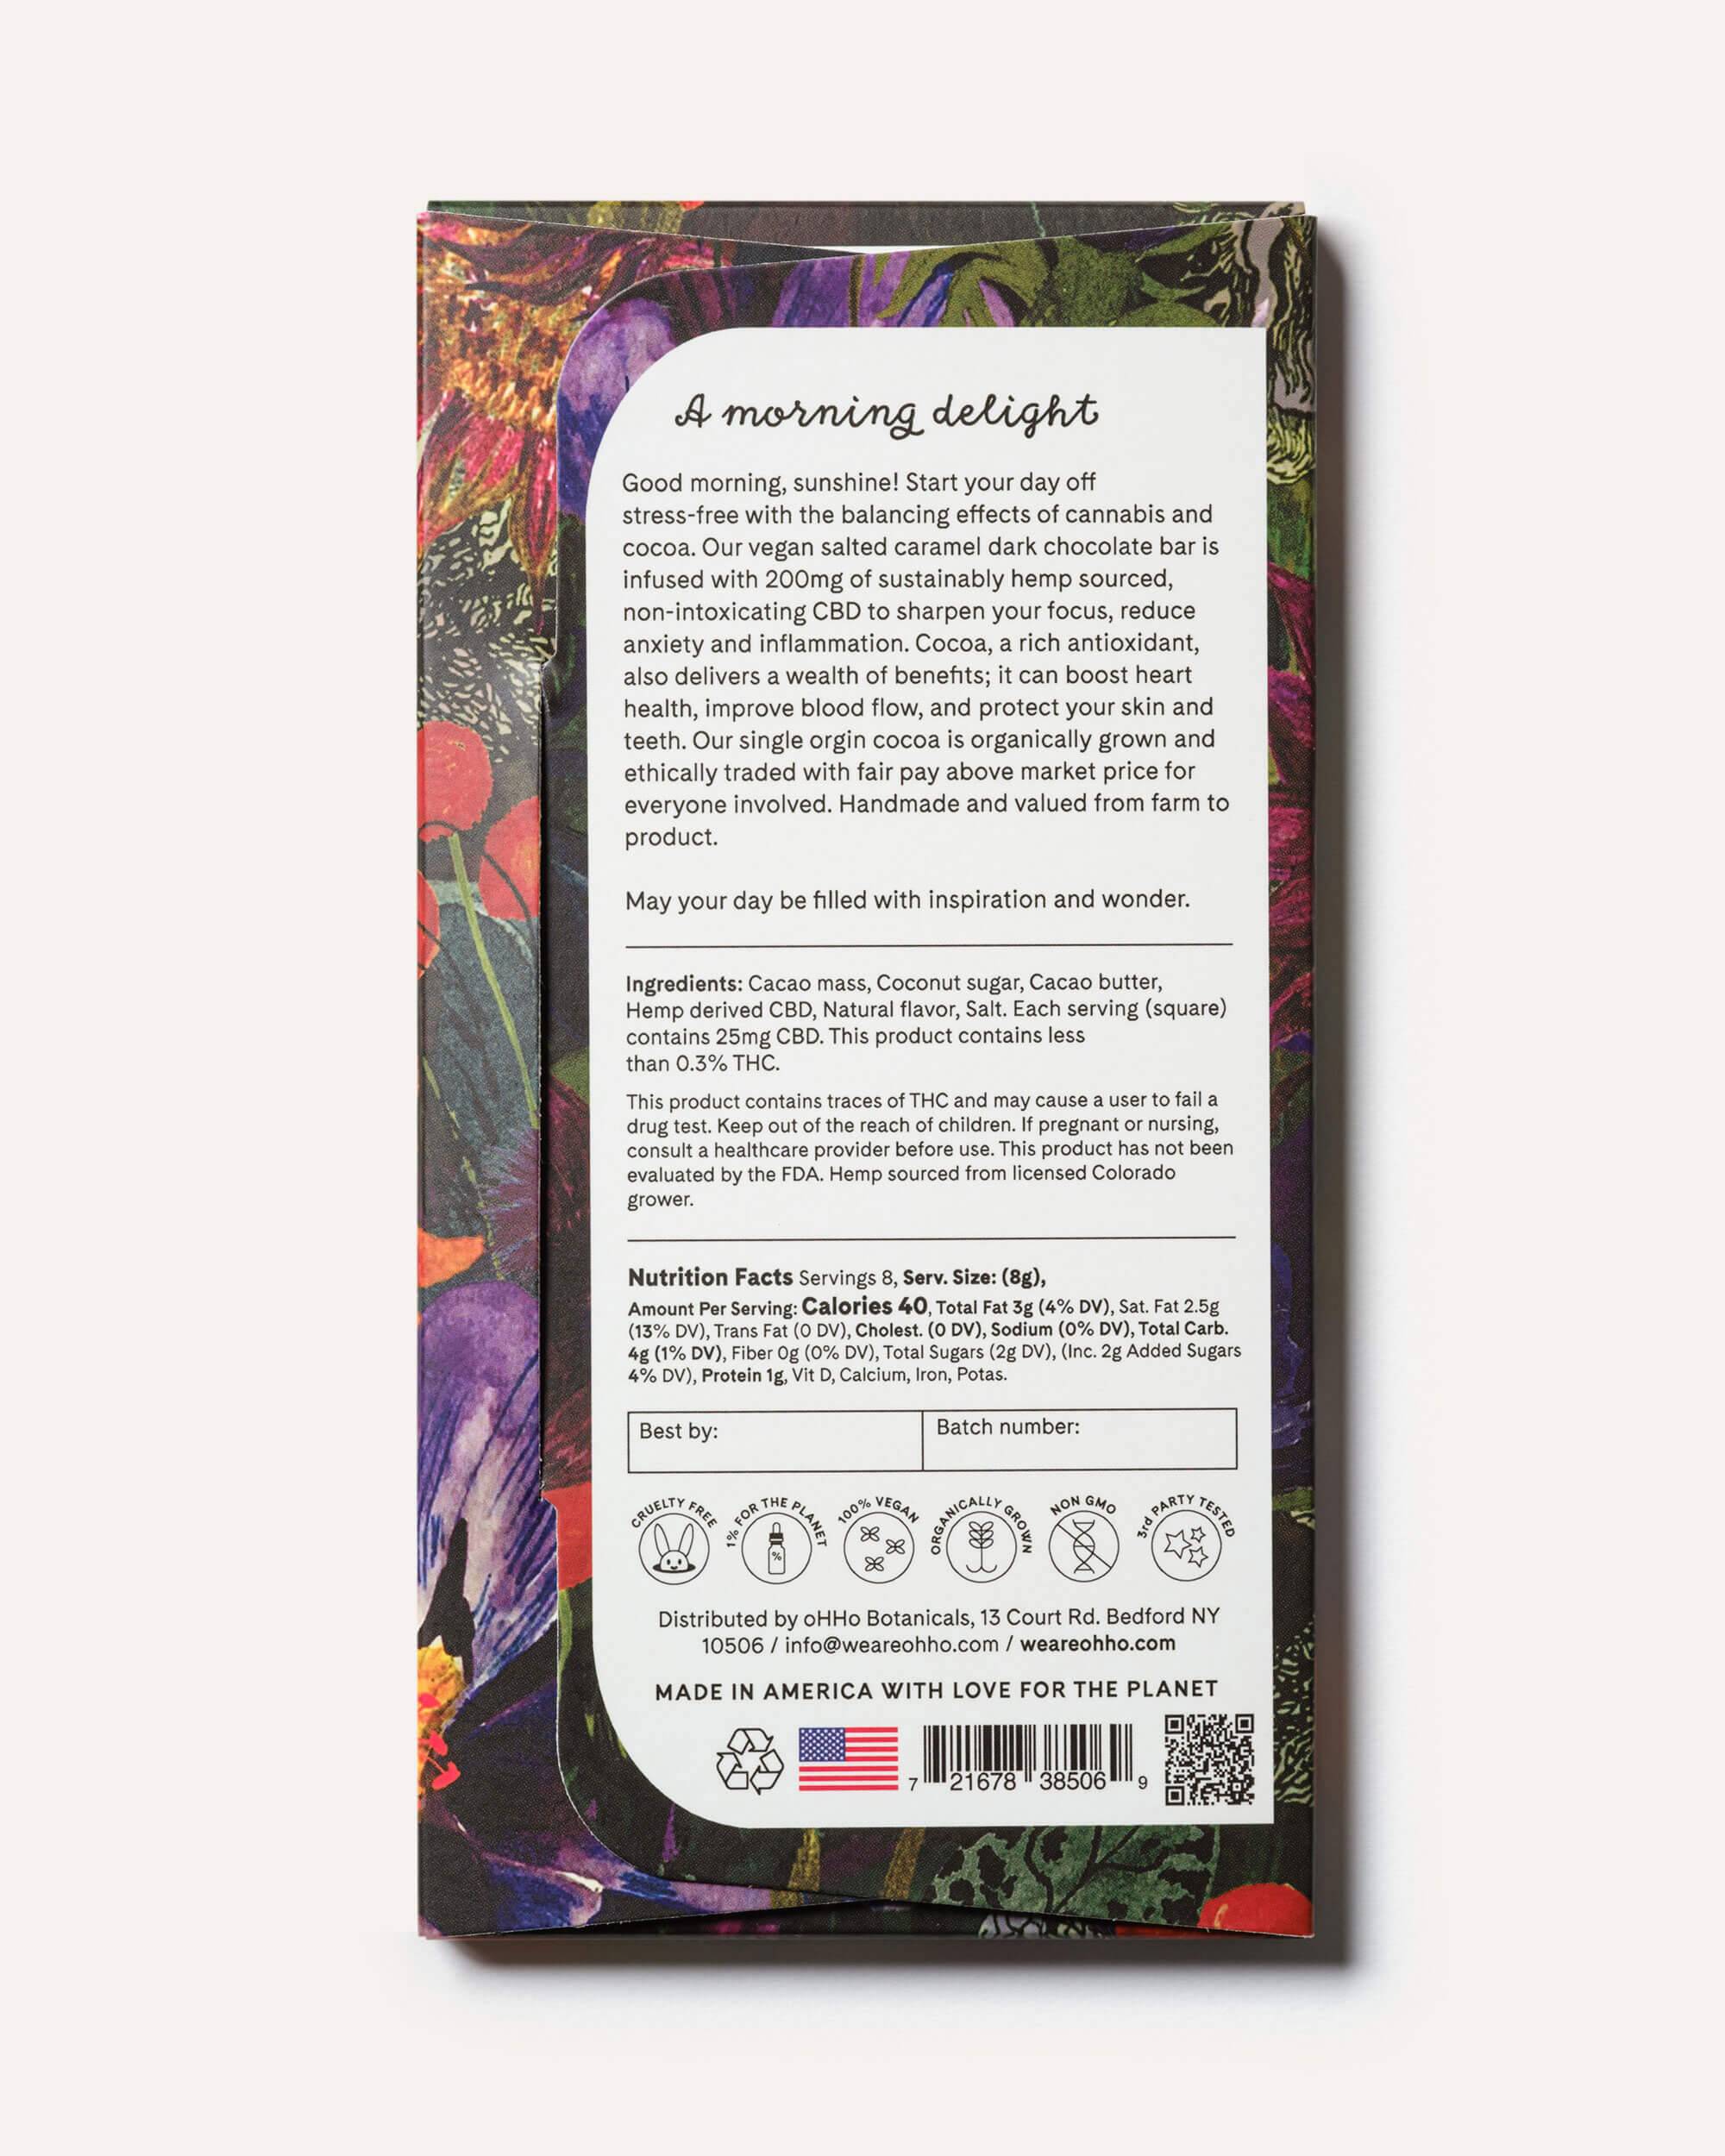 CBDay Dark Chocolate floral packaging back